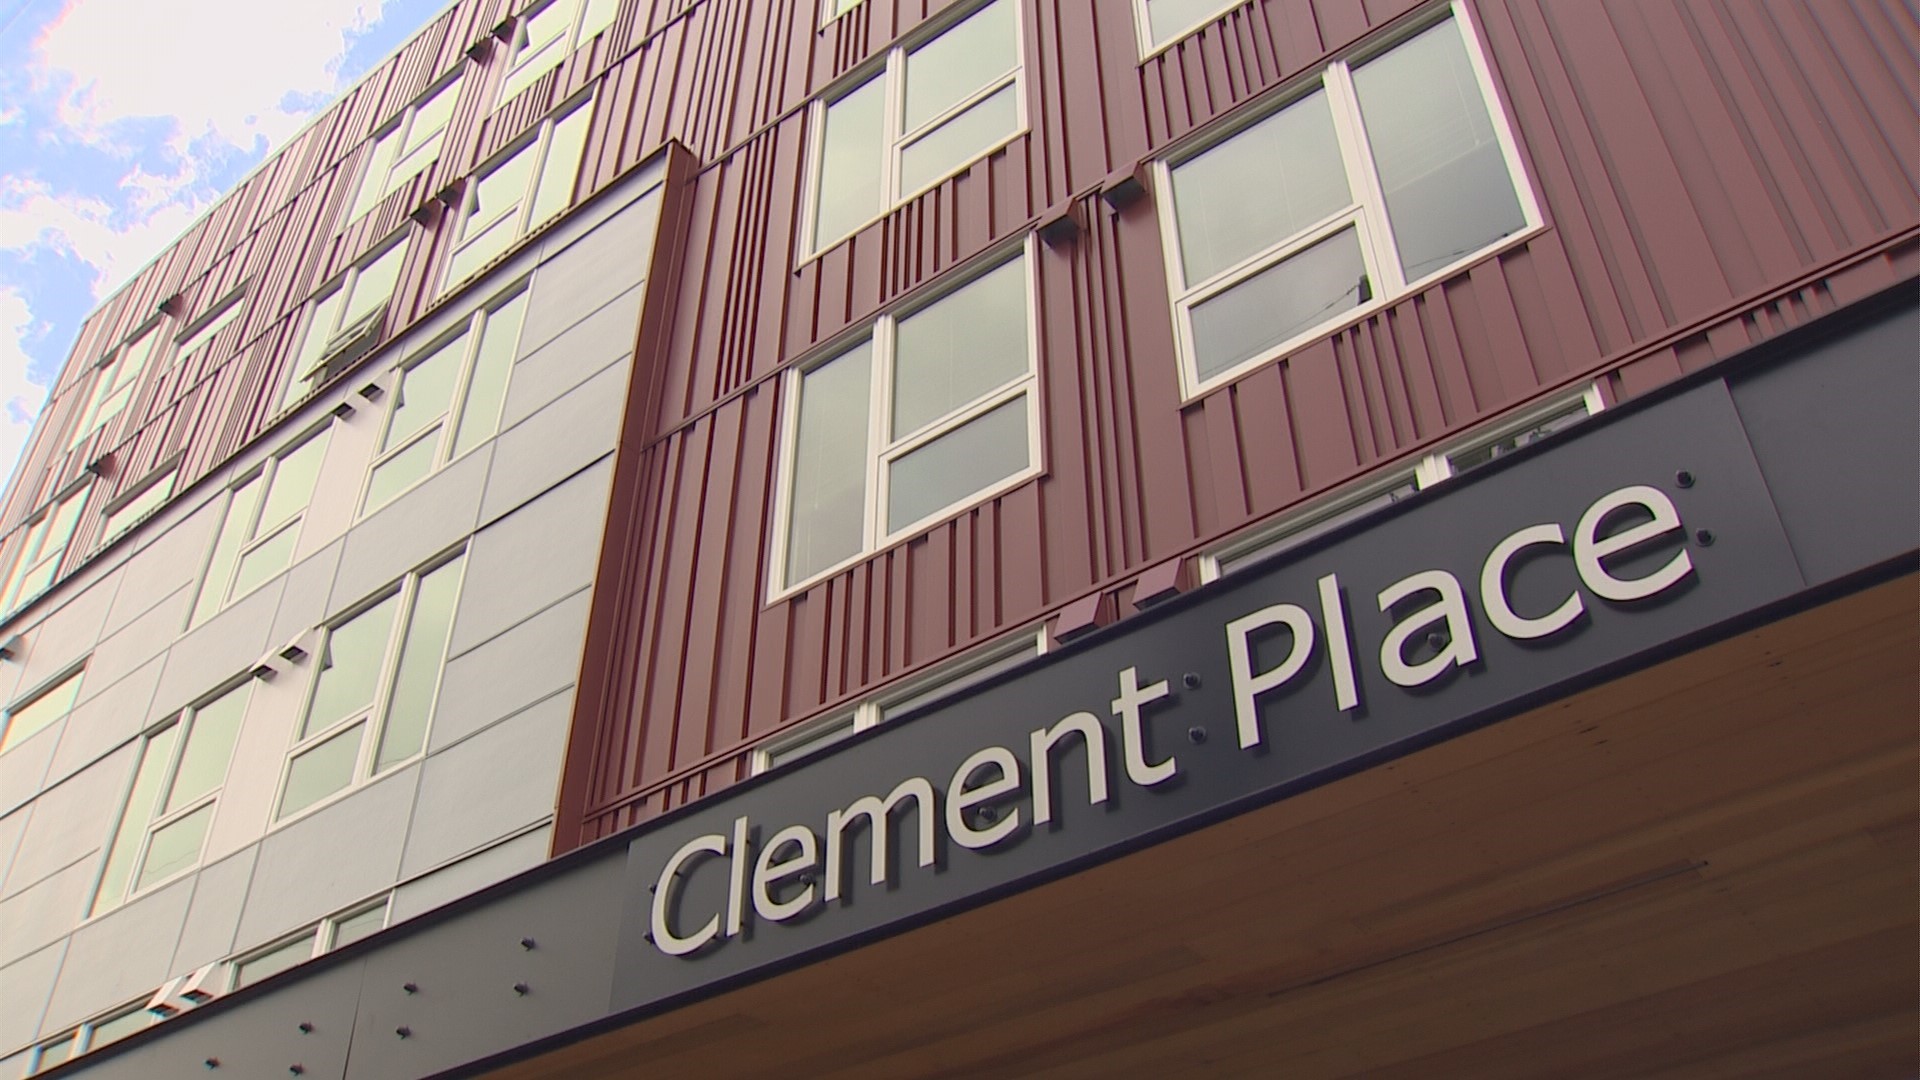 Dozens of homeless people will soon have a place to call home thanks to a 100-unit complex that celebrated its grand opening Tuesday in Seattle.